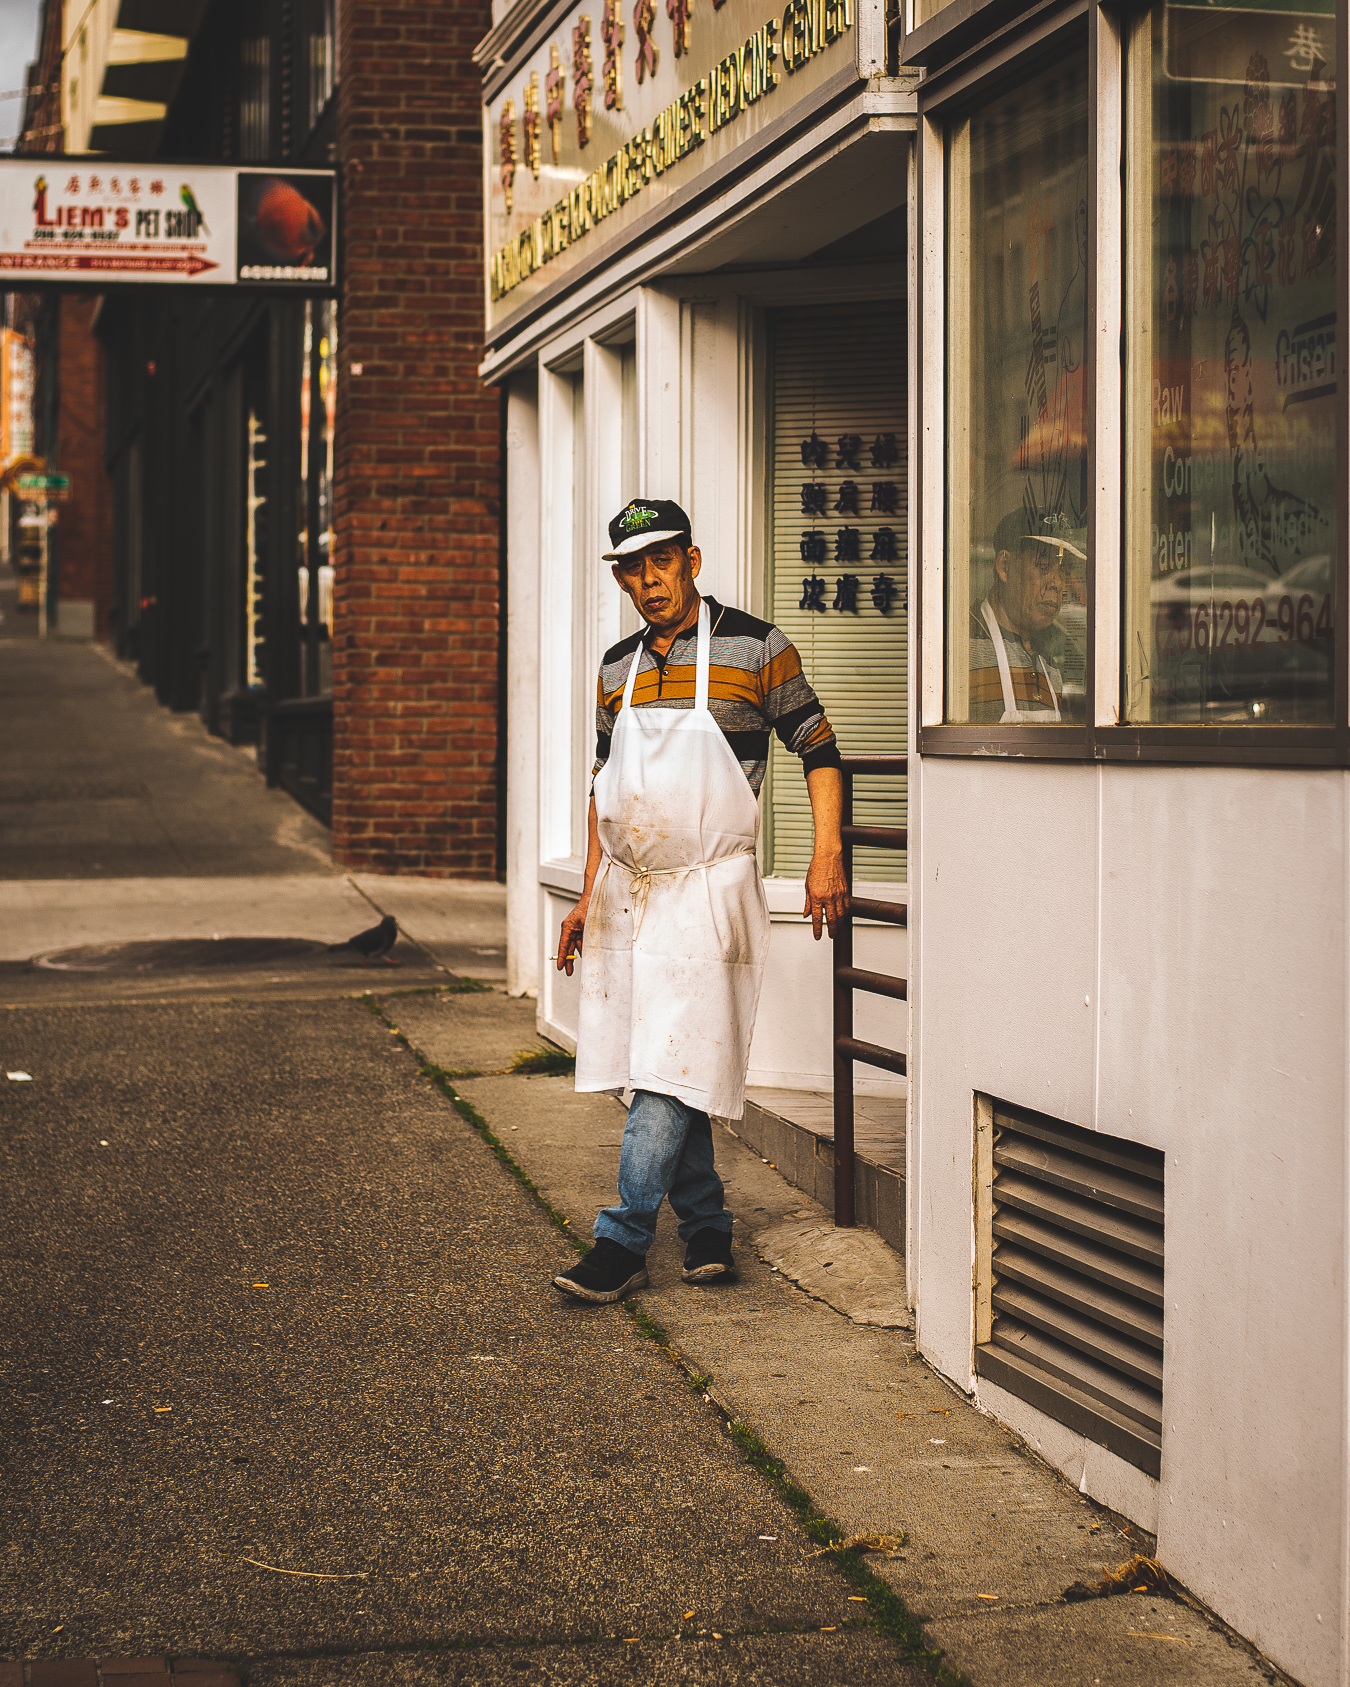 man in apron and cap, standing on sidewalk and smoking a cigarette  outside a Chinese restaurant